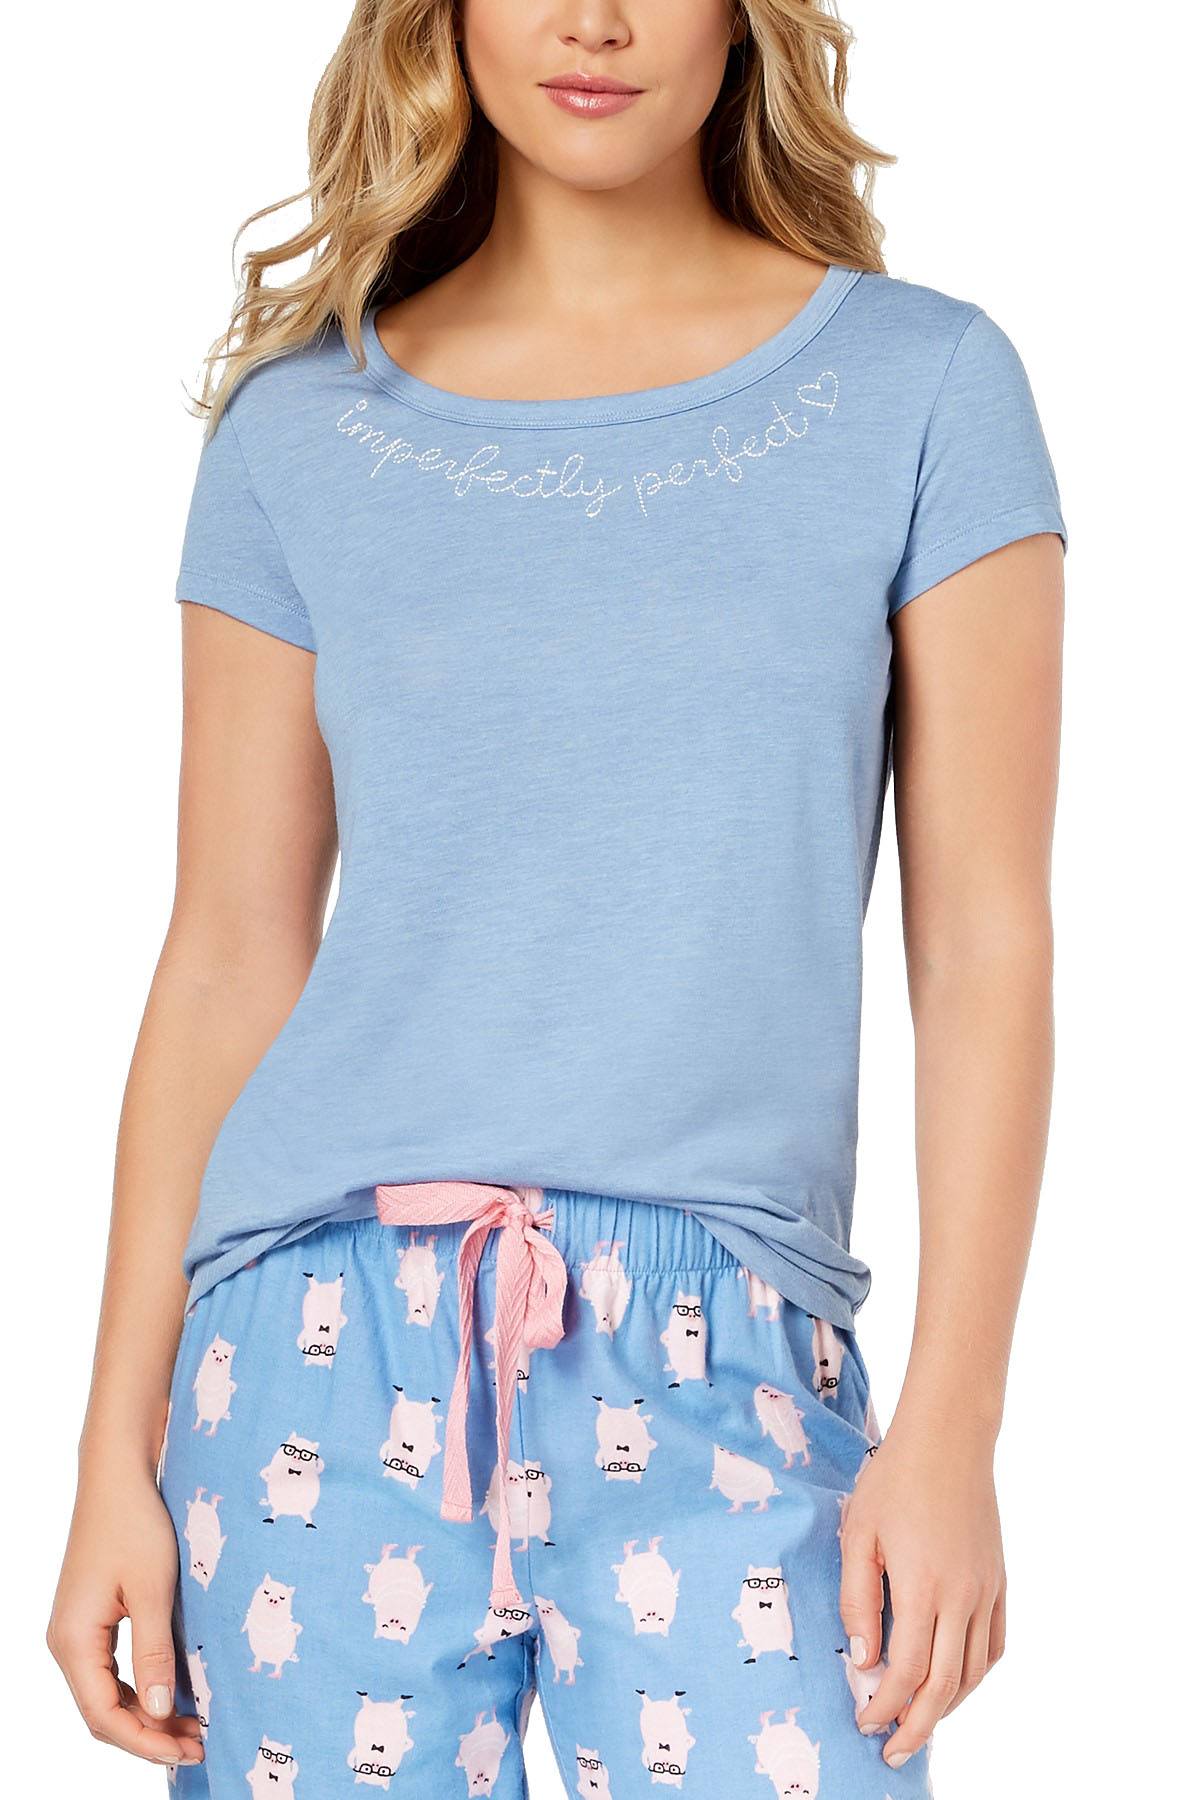 Jenni by Jennifer Moore Blue Imperfectly Perfect Embroidered Lounge Tee